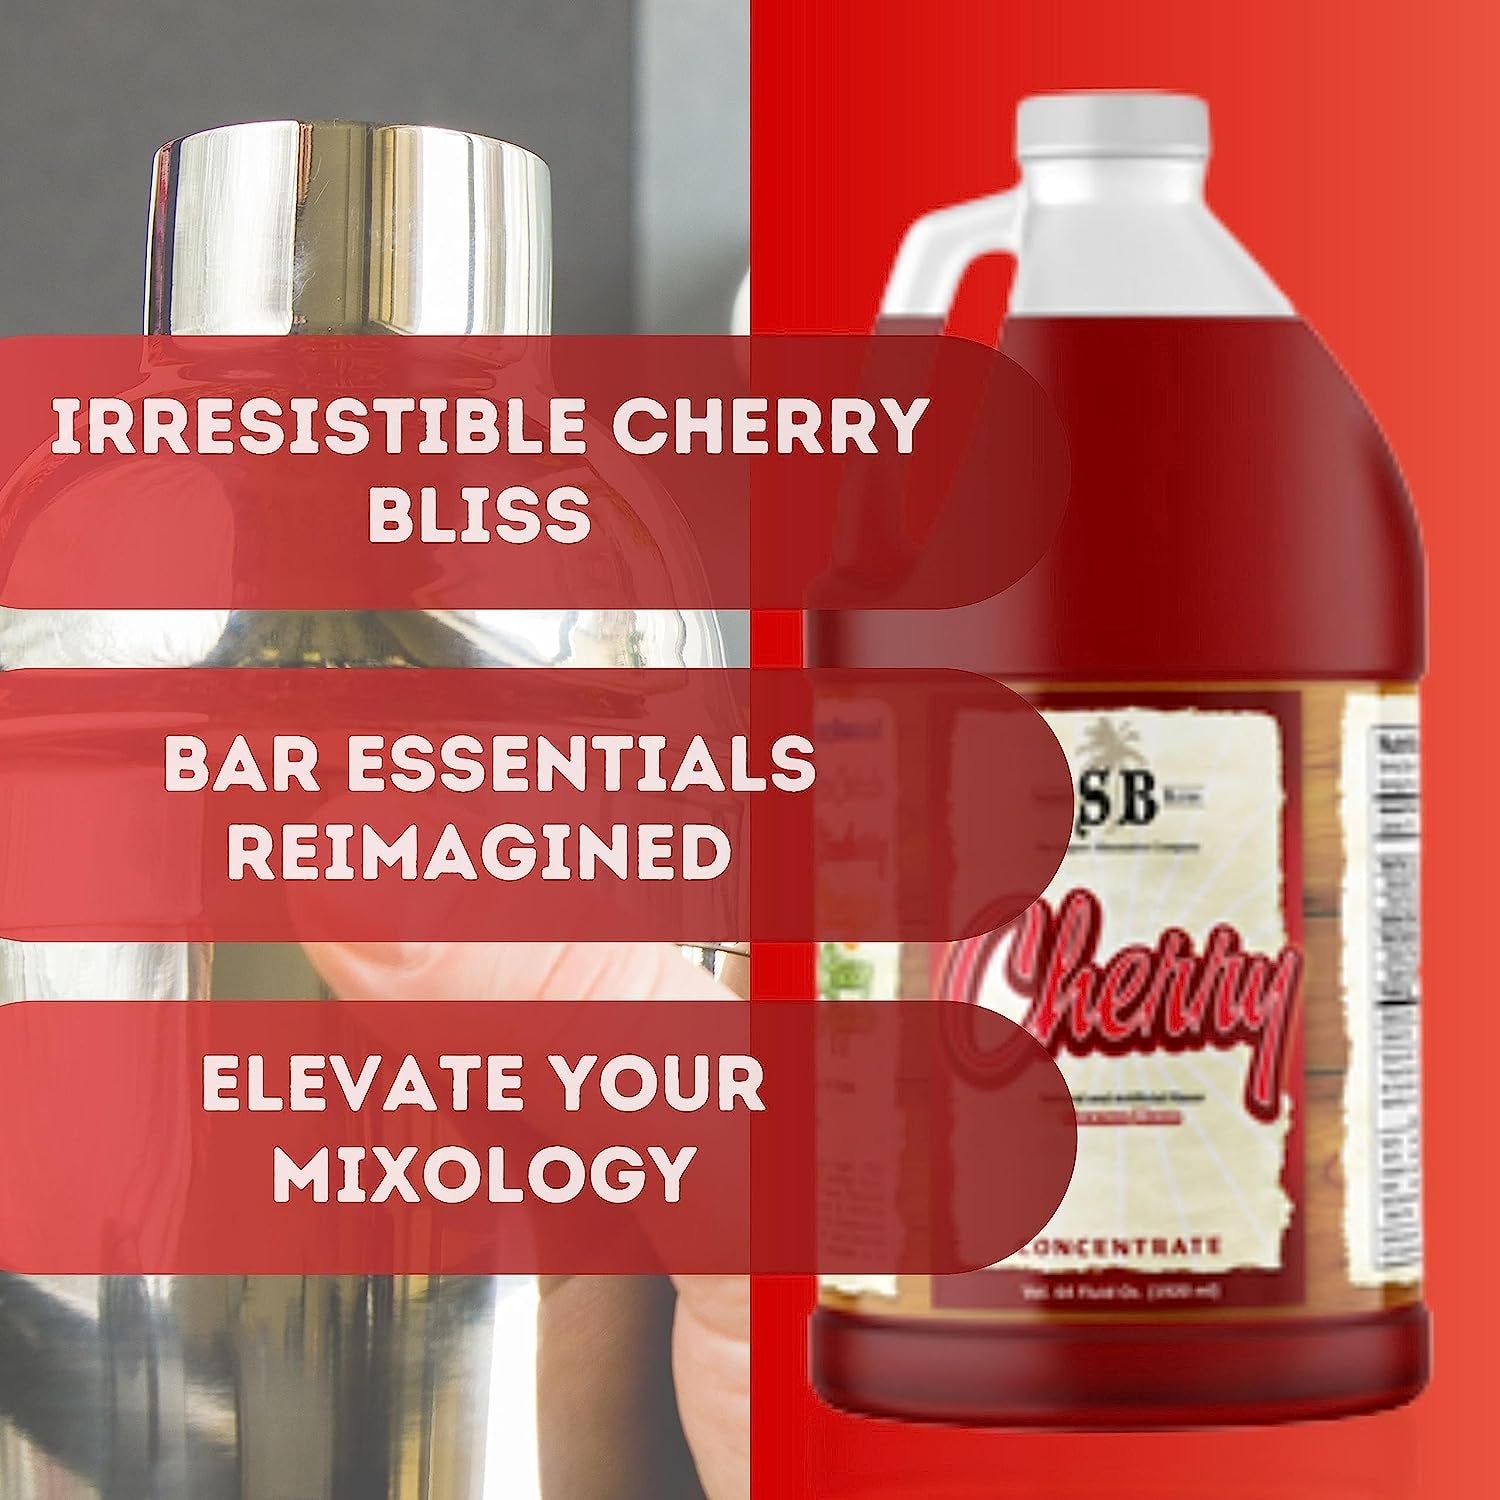 Specialty Blends Cherry Flavored Syrup Cocktail Mixer Concentrate, Made with Organic Cherry Flavor Syrups For Drinks, 1/2 Gallon (Pack of 1) - with Bonus Worldwide Nutrition Multi Purpose Key Chain